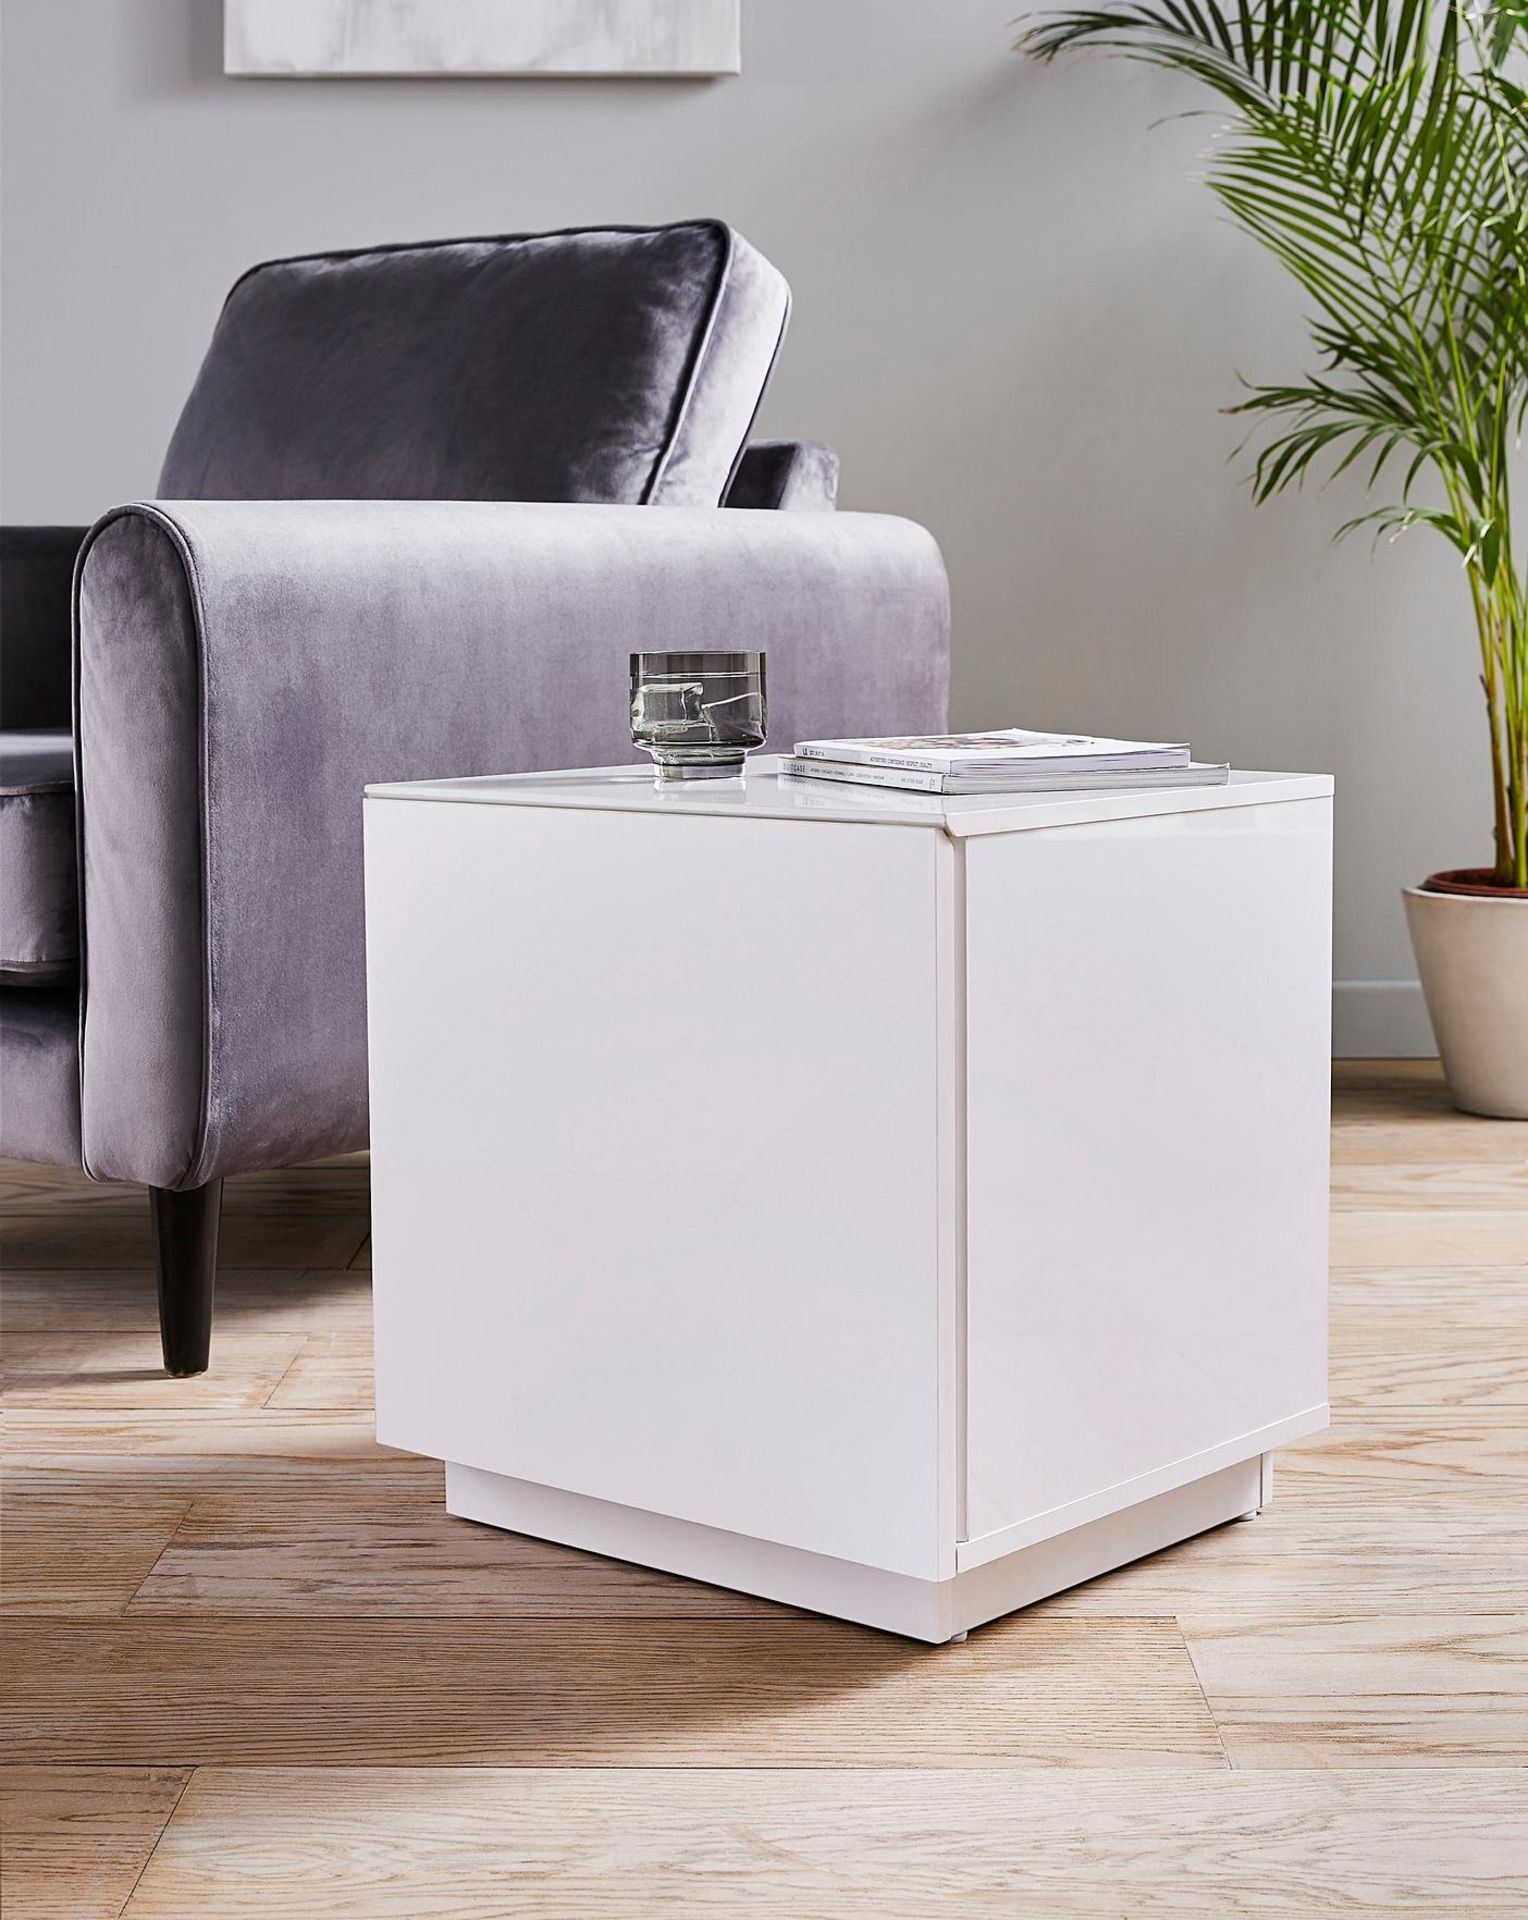 NEW & BOXED ALLURE High Gloss Side Table. RRP £139. Part of At Home Collection, the Allure Living